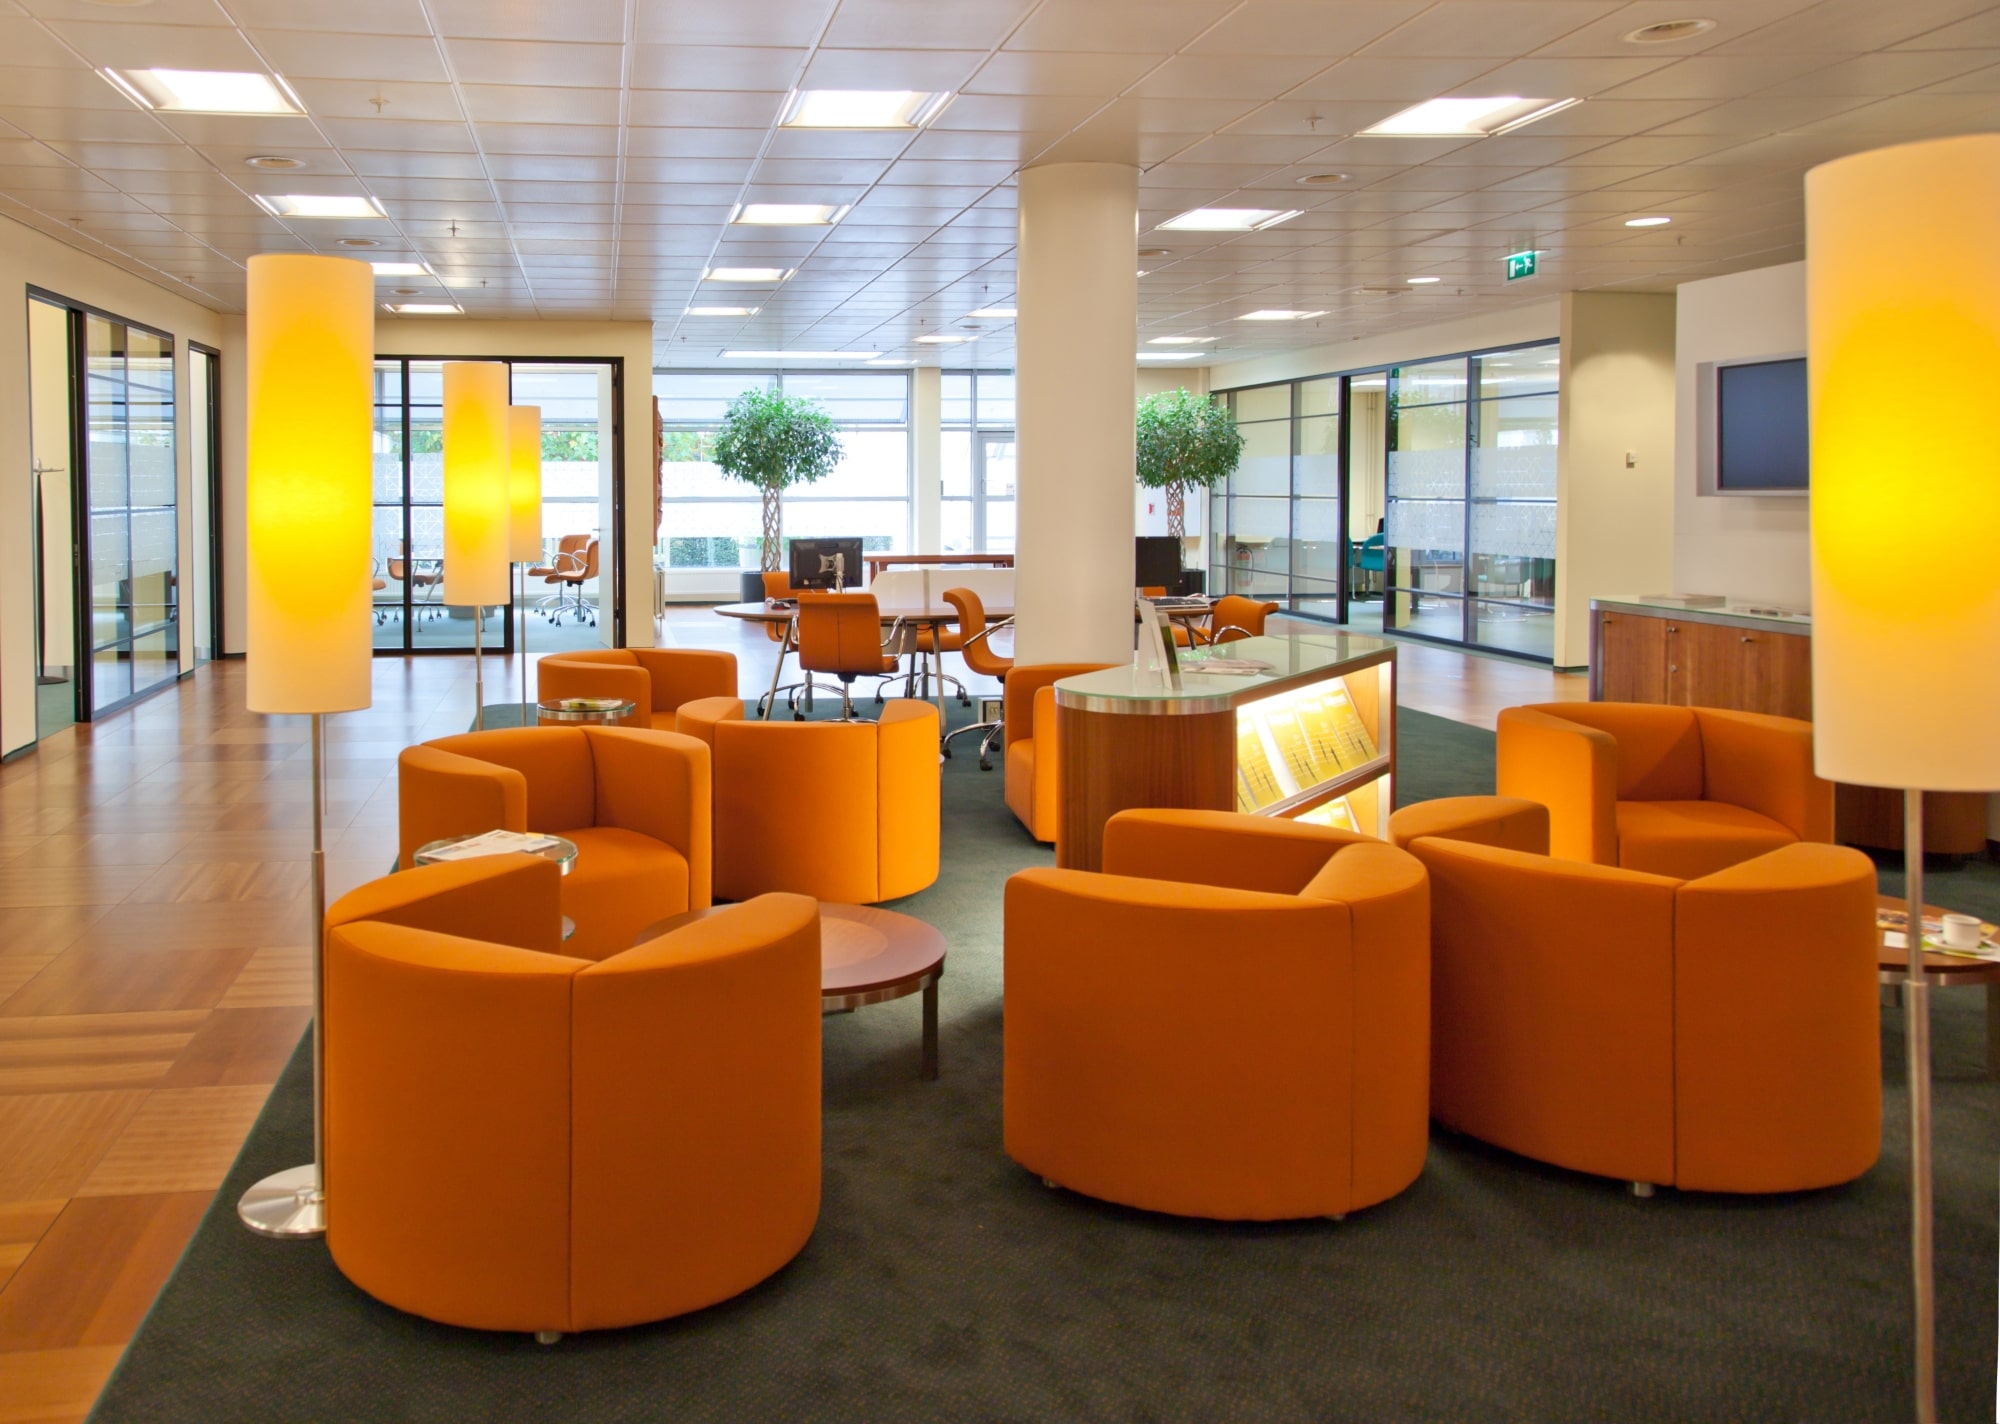 A shared area in a coworking space, with bright orange tub chairs and funky lighting.